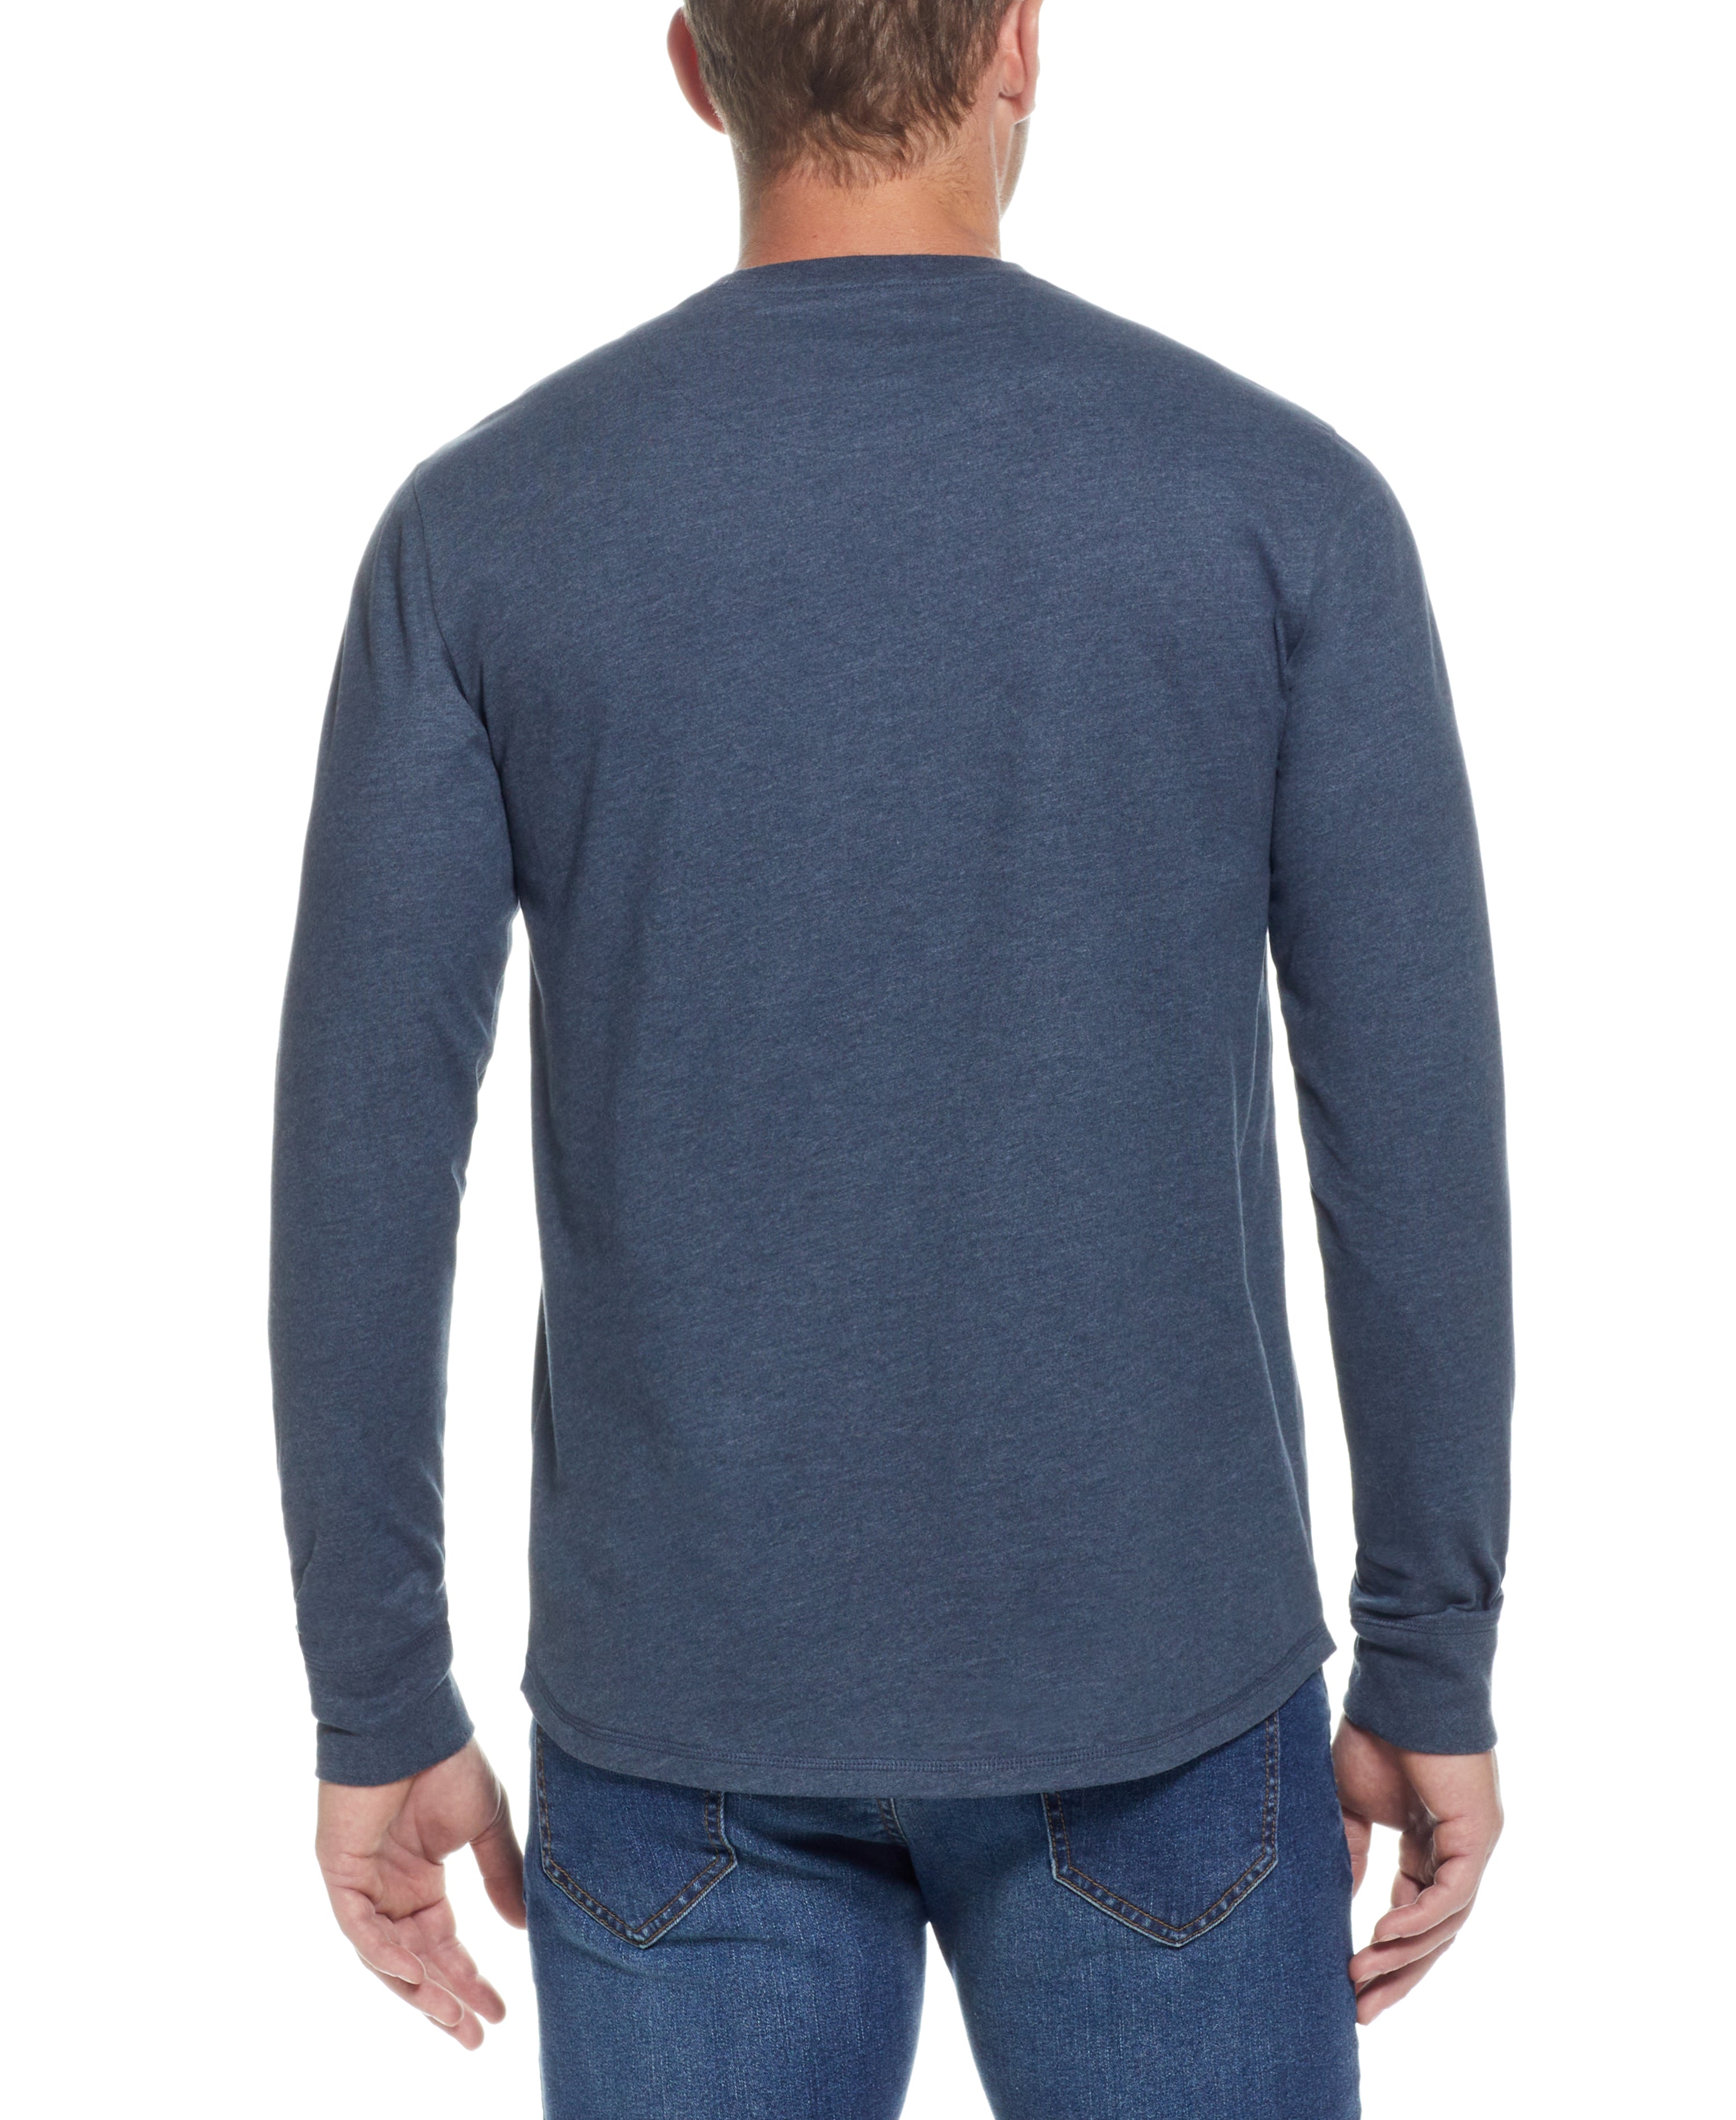 LONG SLEEVE BRUSHED JERSEY CREW in BLUE MIRAGE HTR